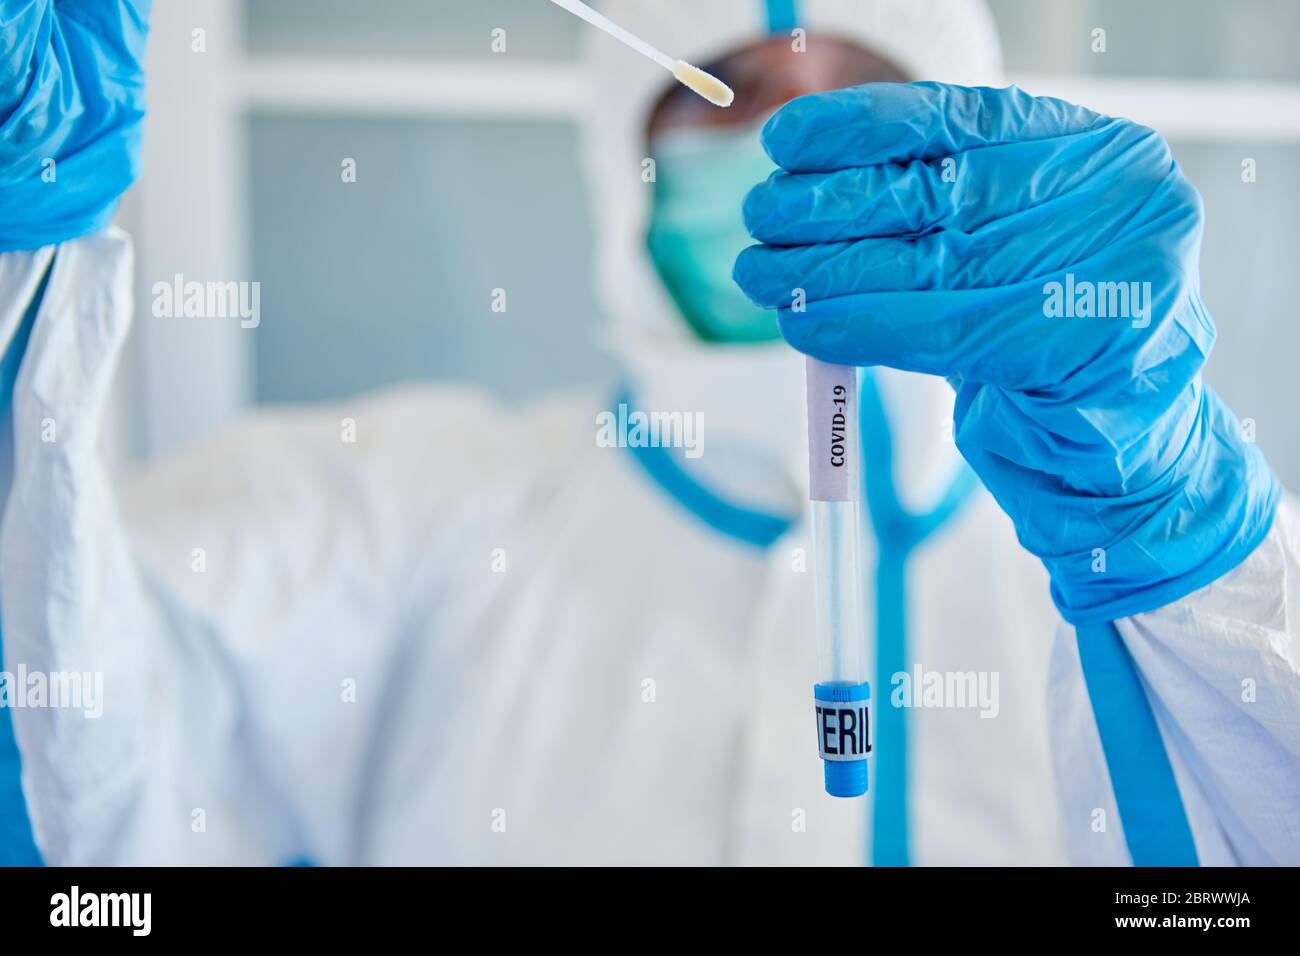 Medic in protective clothing packs throat swab from saliva sample for Covid-19 test Stock Photo